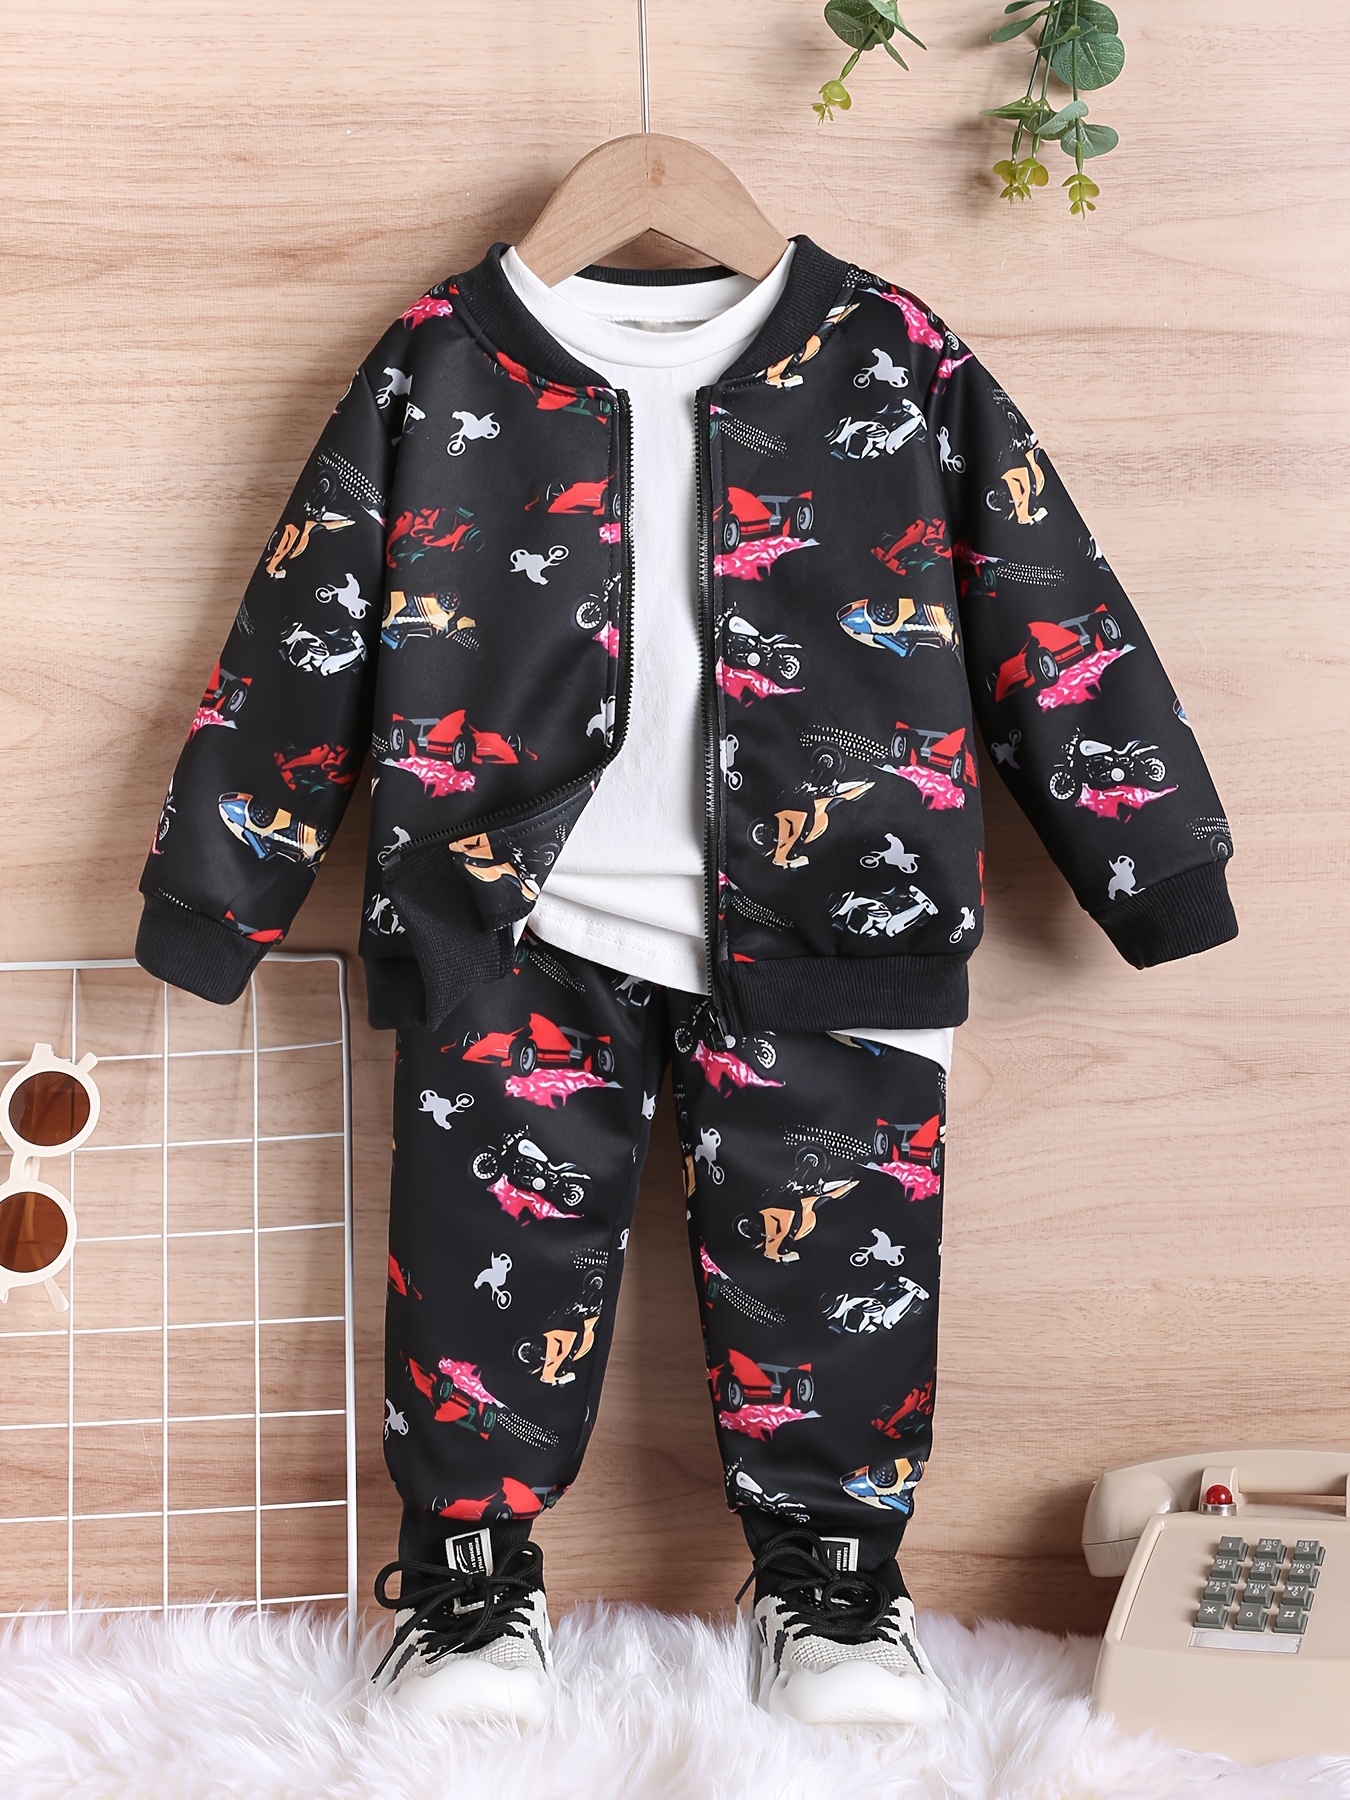 2pcs Boy's Sports Car Pattern Bomber Jacket Outfit, Varsity Jacket & Track  Pants Set, Casual Long Sleeve Coat, Kid's Clothes For Spring Fall Winter, 